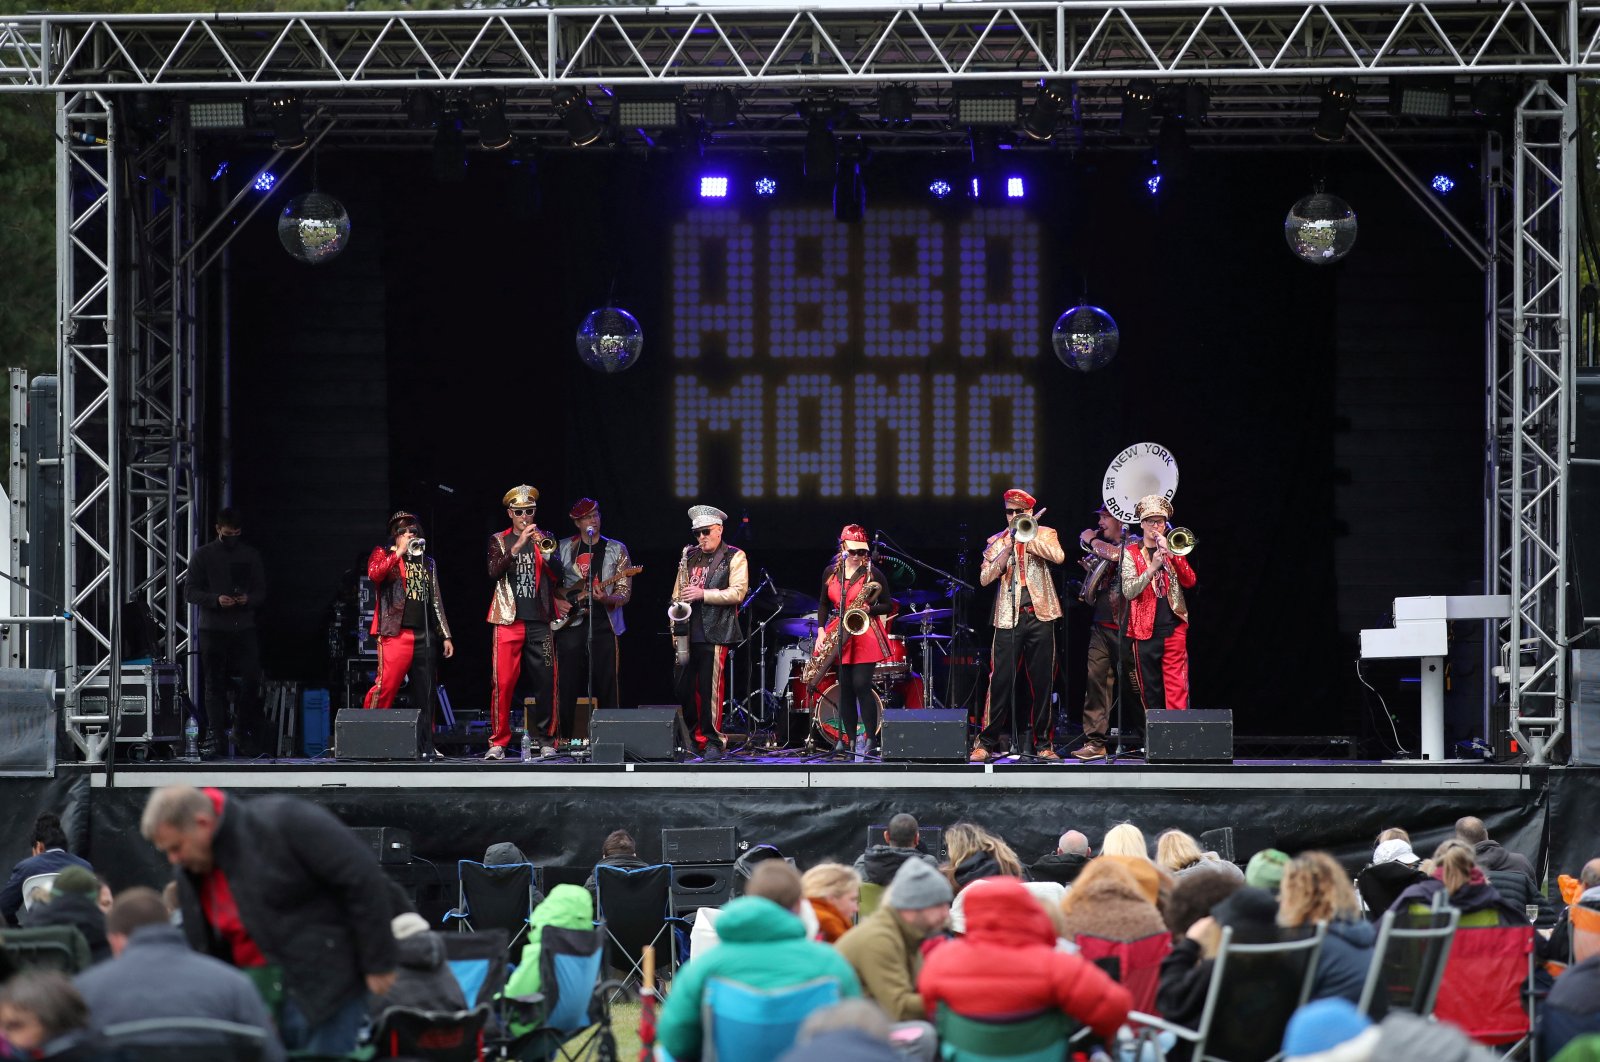 The New York Brass Band performs at the ABBA Mania concert amid the spread of the coronavirus disease at Scampston Hall in Malton, Yorkshire, Britain, Aug. 29, 2020. (Reuters Photo)